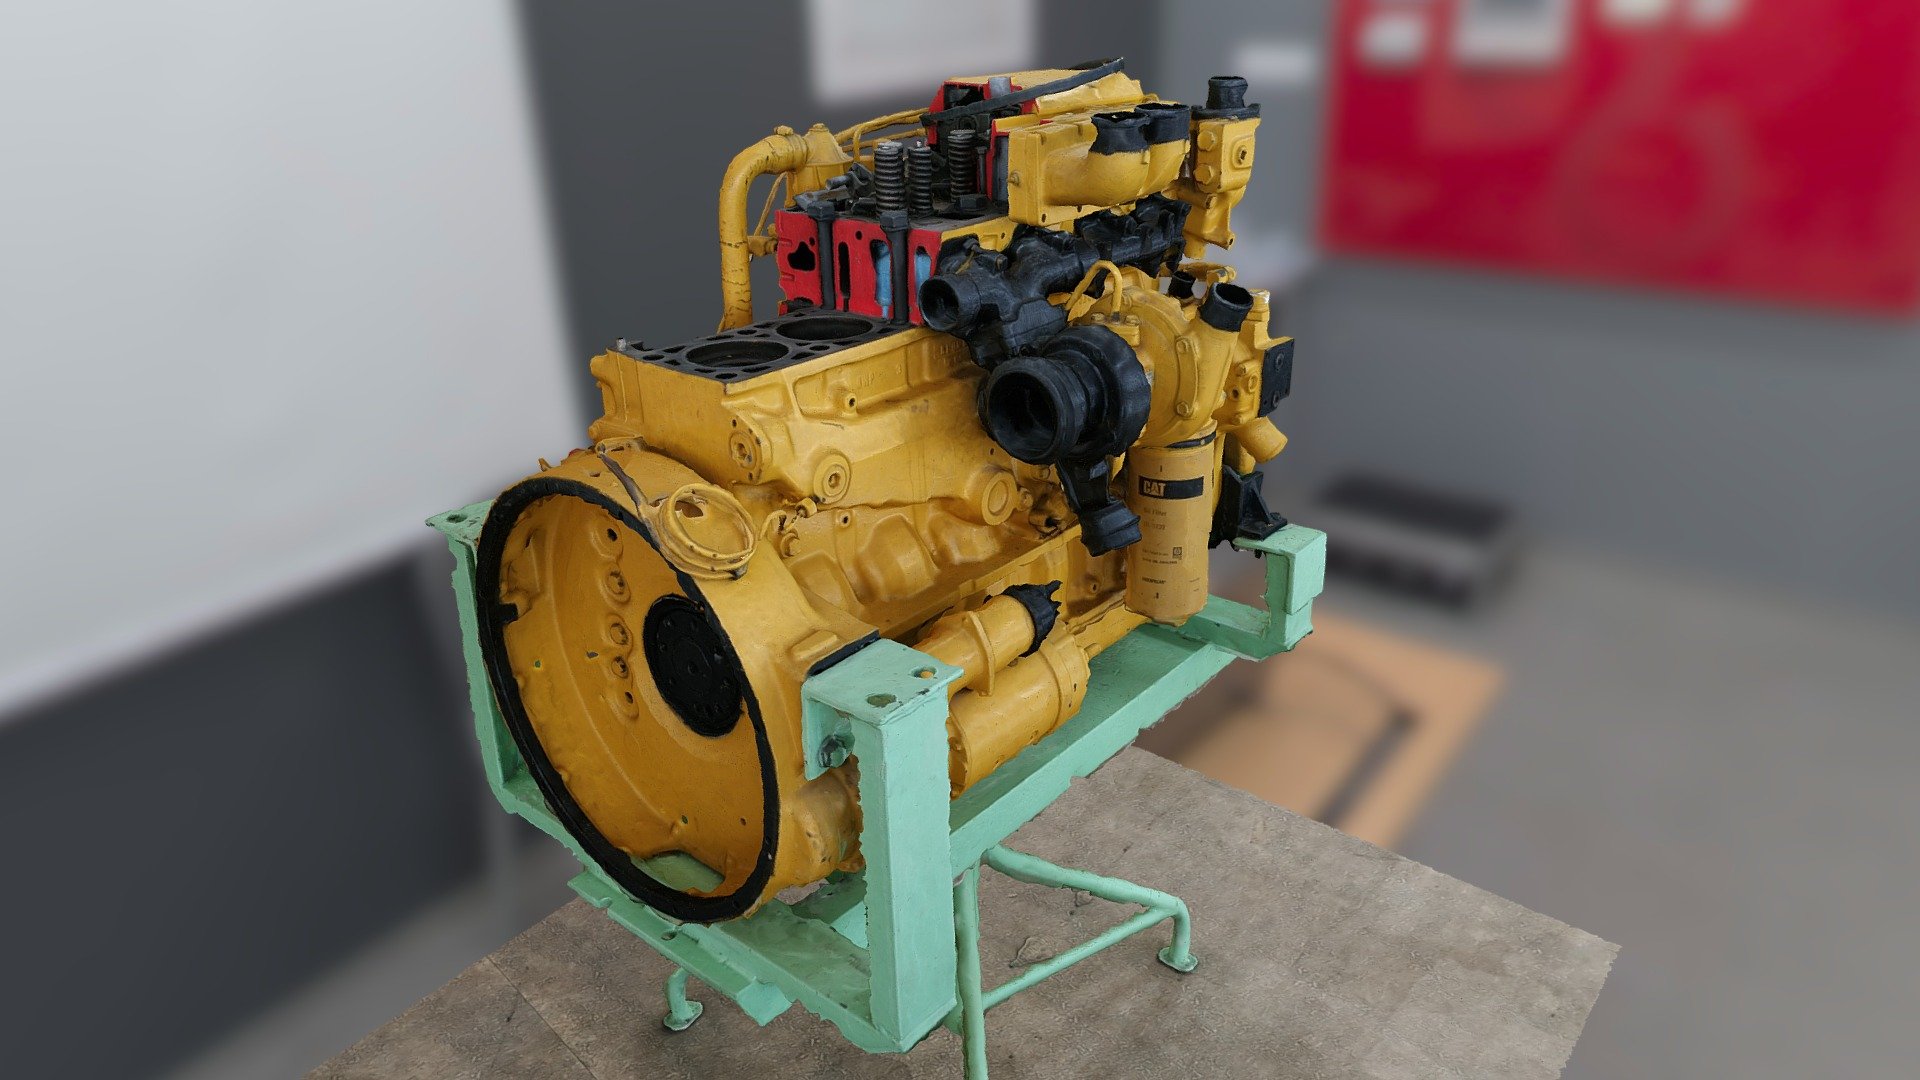 The 3116 Cat Engine is proficient at generating peak power levels of 205 horsepower at 2,400 rpm and 350 horsepower at 2,800 rpm. The Caterpillar 3116 is a turbocharged diesel engine used mainly for marine propulsion. The 3116 can work as a single unit or coupled with another for the likes of powerboats. The 3116 Caterpillar Engine is an extremely versatile engine due to its ability to work with several different Caterpillar marine transmissions that can supply different levels of acceleration. The 3116 provided the foundation for its successor the 3126, which was later replaced by the CAT C7 engine in 2003. You can’t really go wrong with a Cat engine, after all, Cat was used to power the American Virginia class nuclear submarine, which employs the Series 3512B turbocharged V-12 diesel engine…you can be sure your 3116 Cat Engine is more than just your standard engine.





 - Cat 3116 Engine - Download Free 3D model by Neo_minigan (@neominigan) 3d model